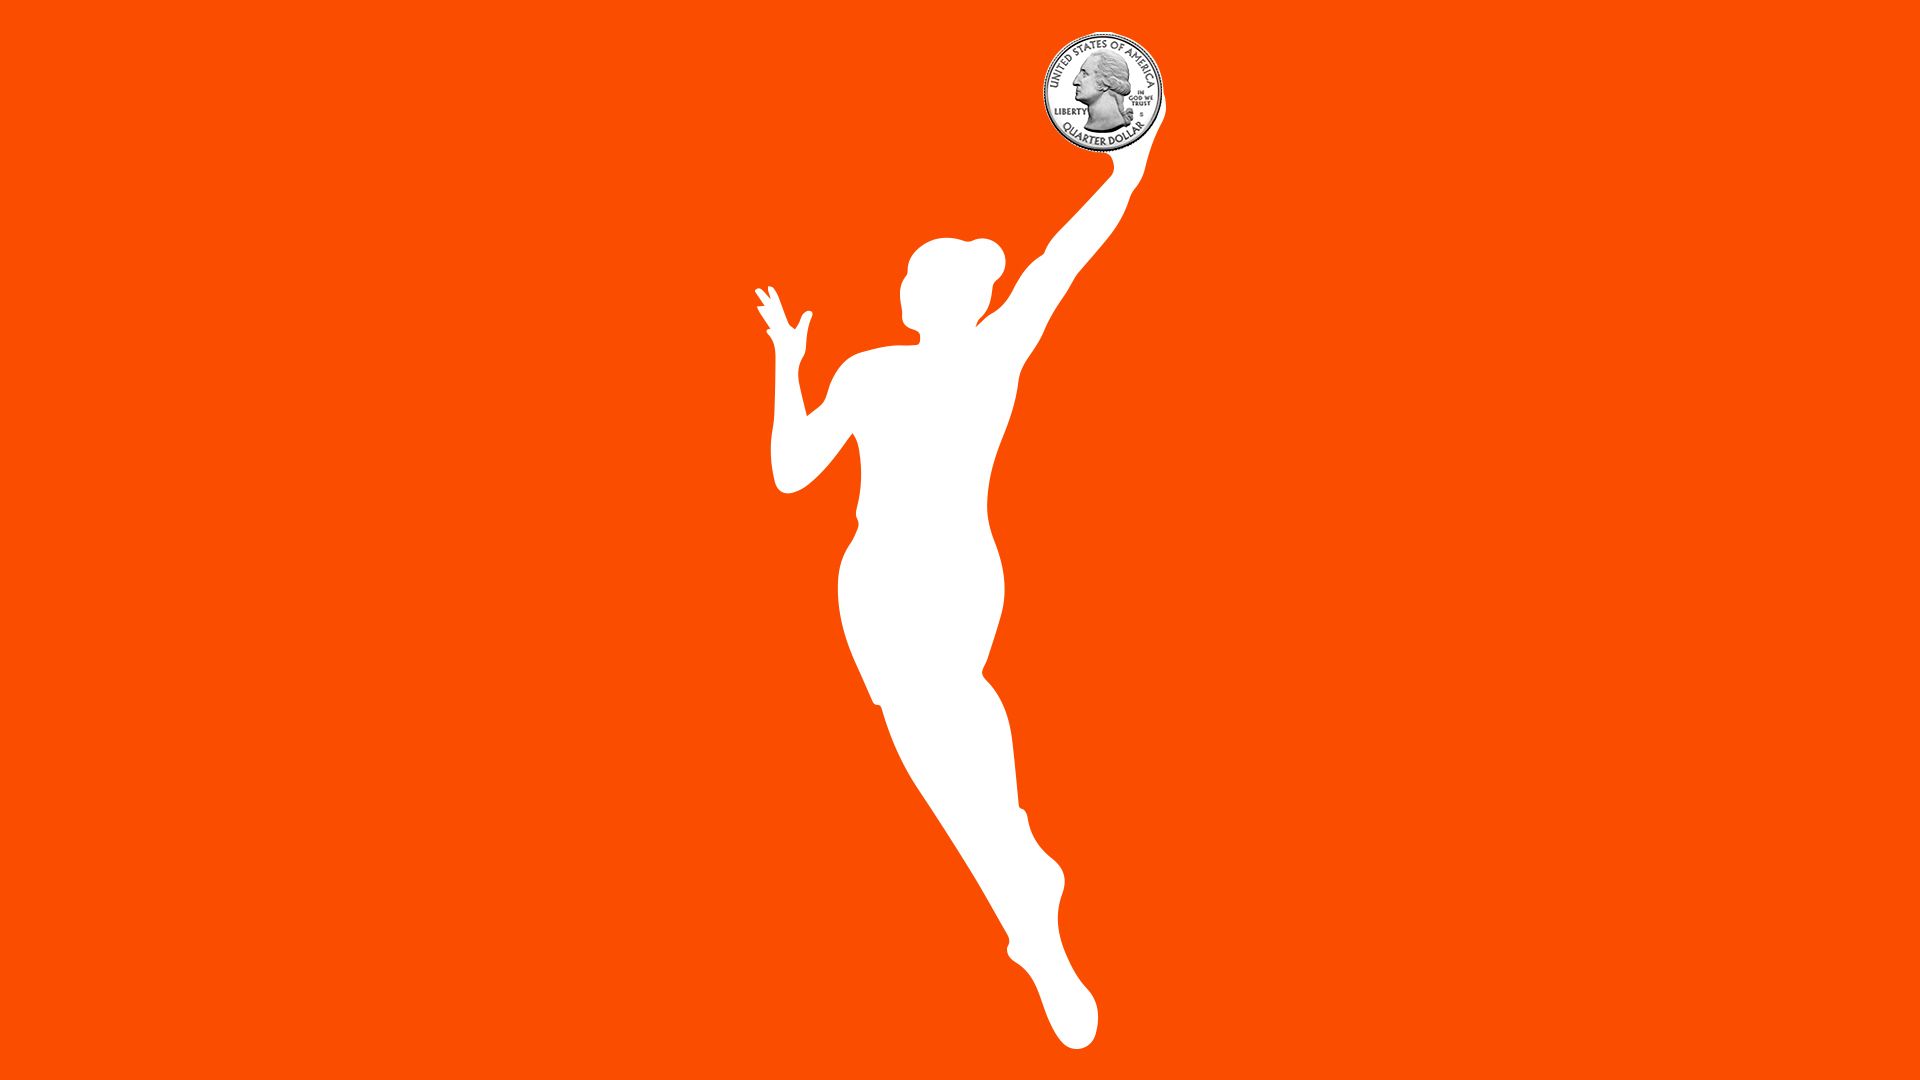 WNBA logo with a quarter in place of the basketball ball 